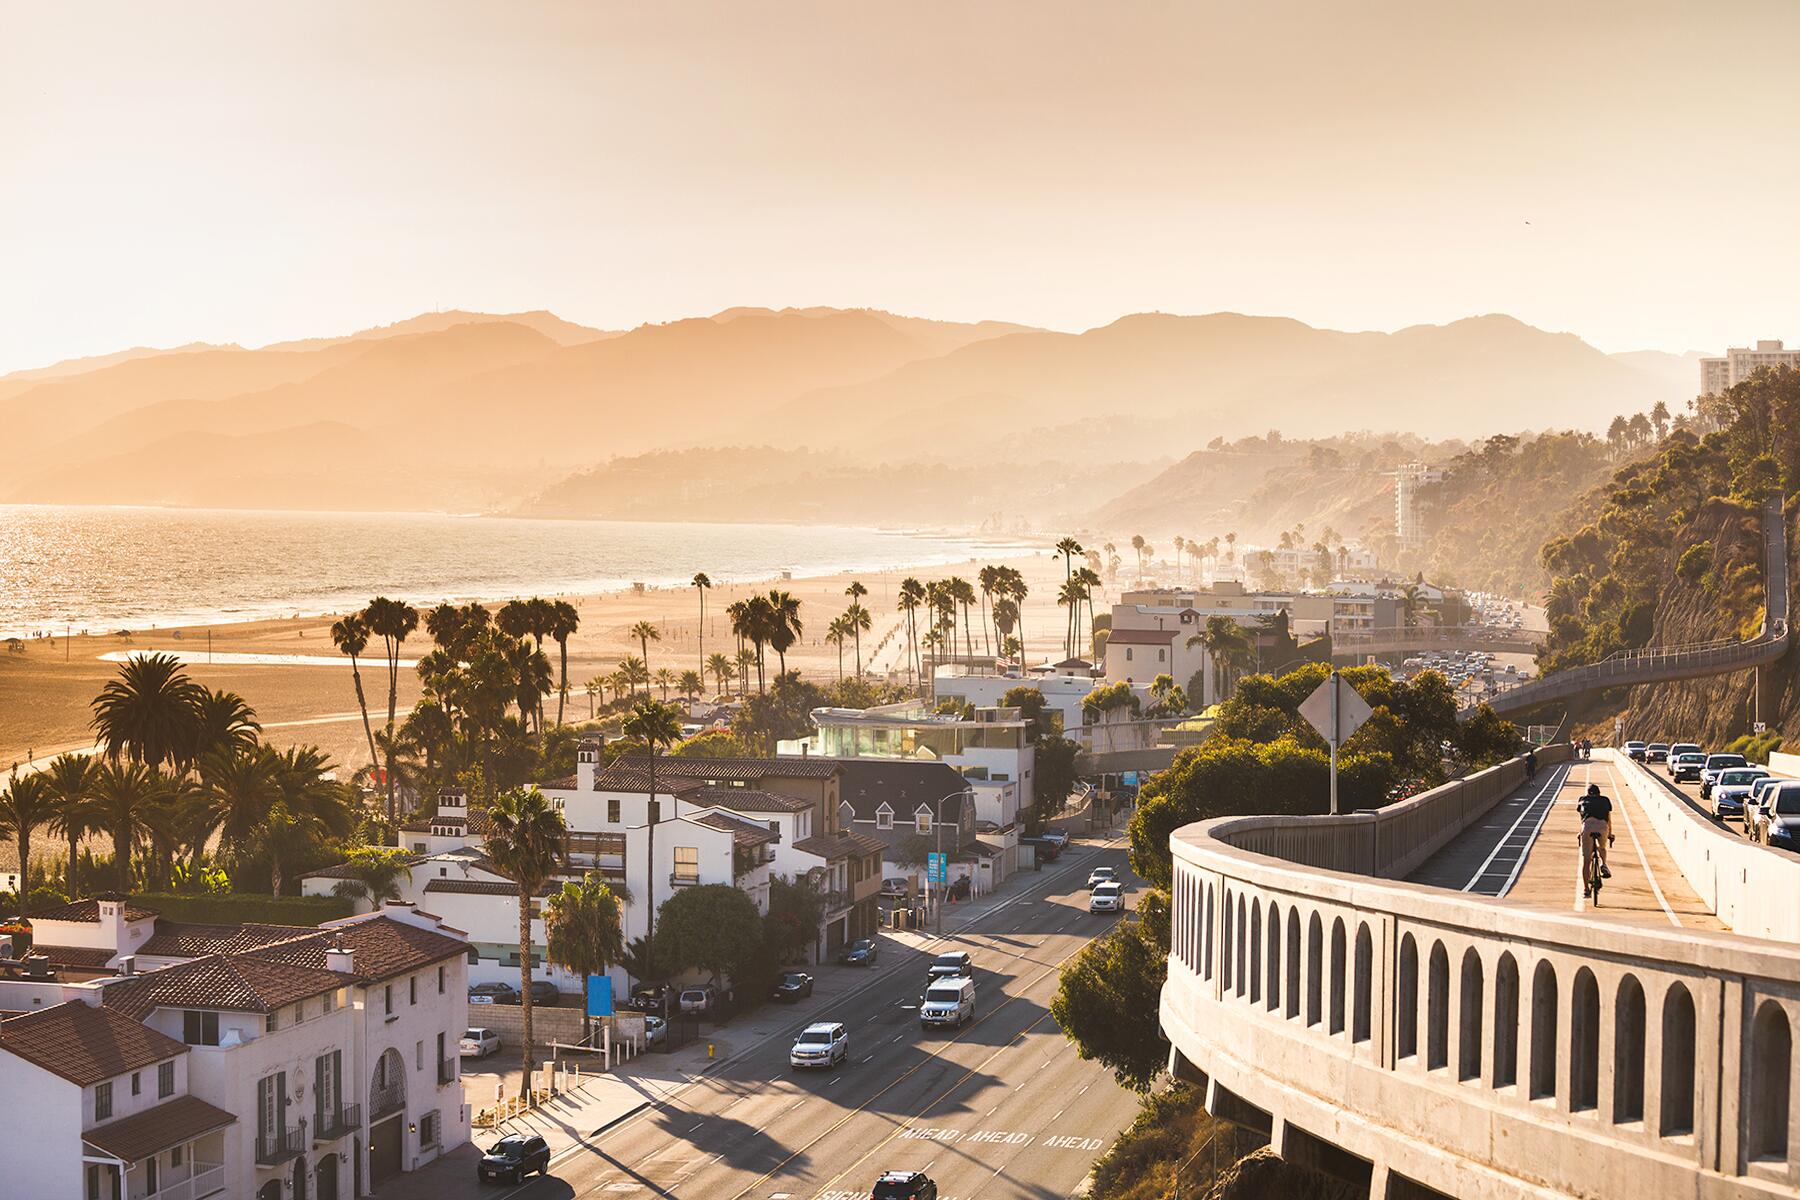 <a href='https://www.fodors.com/world/north-america/usa/california/experiences/news/photos/the-best-things-to-see-on-californias-highway-1#'>From &quot;Cruising the Coast: What to See on America's Best Road Trip: Santa Monica&quot;</a>